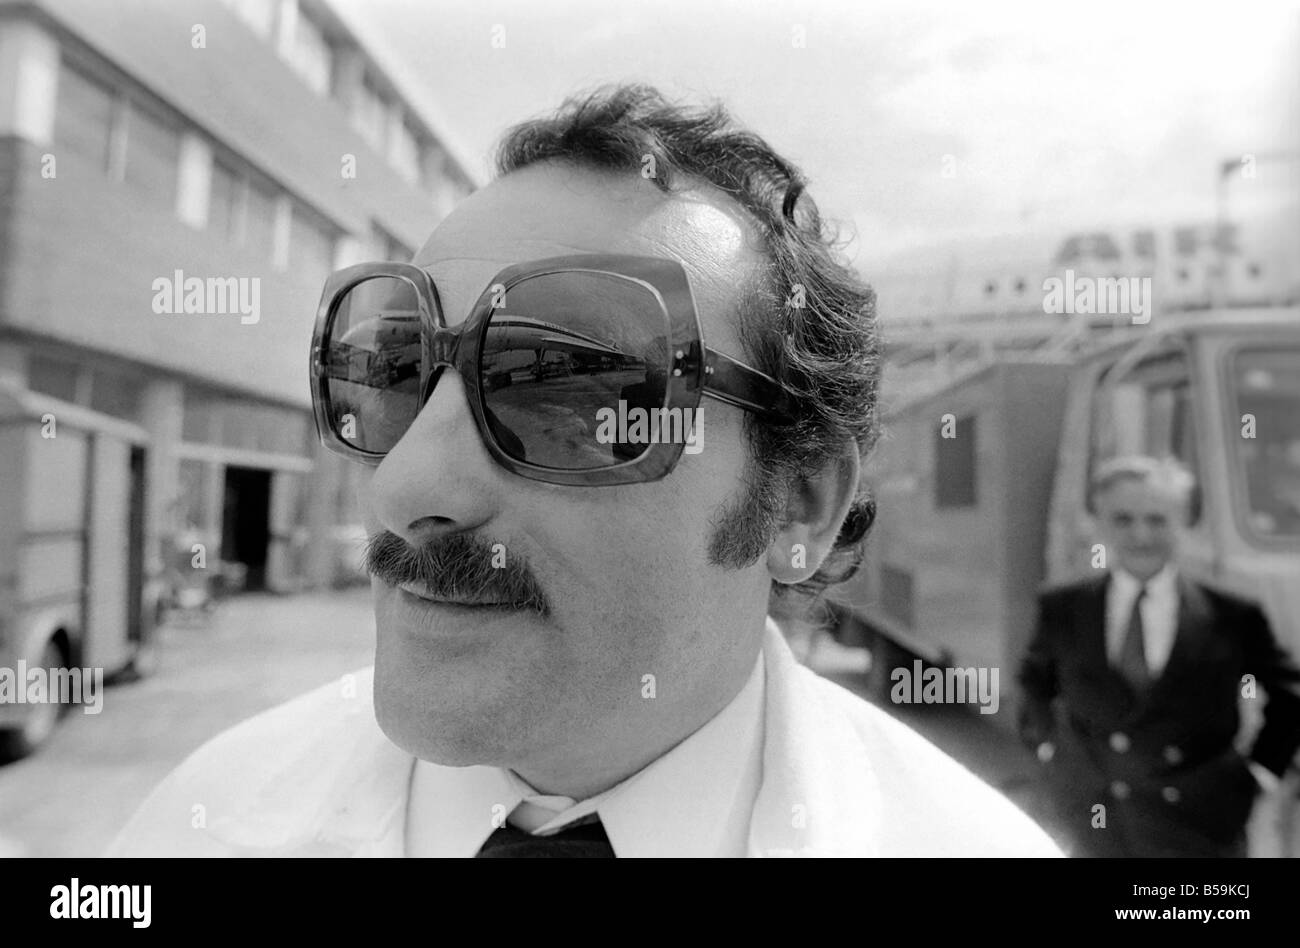 Mr. Irene Quaranta aged 39 with reflection of Concorde aircraft in his spectacles. &#13;&#10;April 1975 &#13;&#10;75-2072-018 Stock Photo